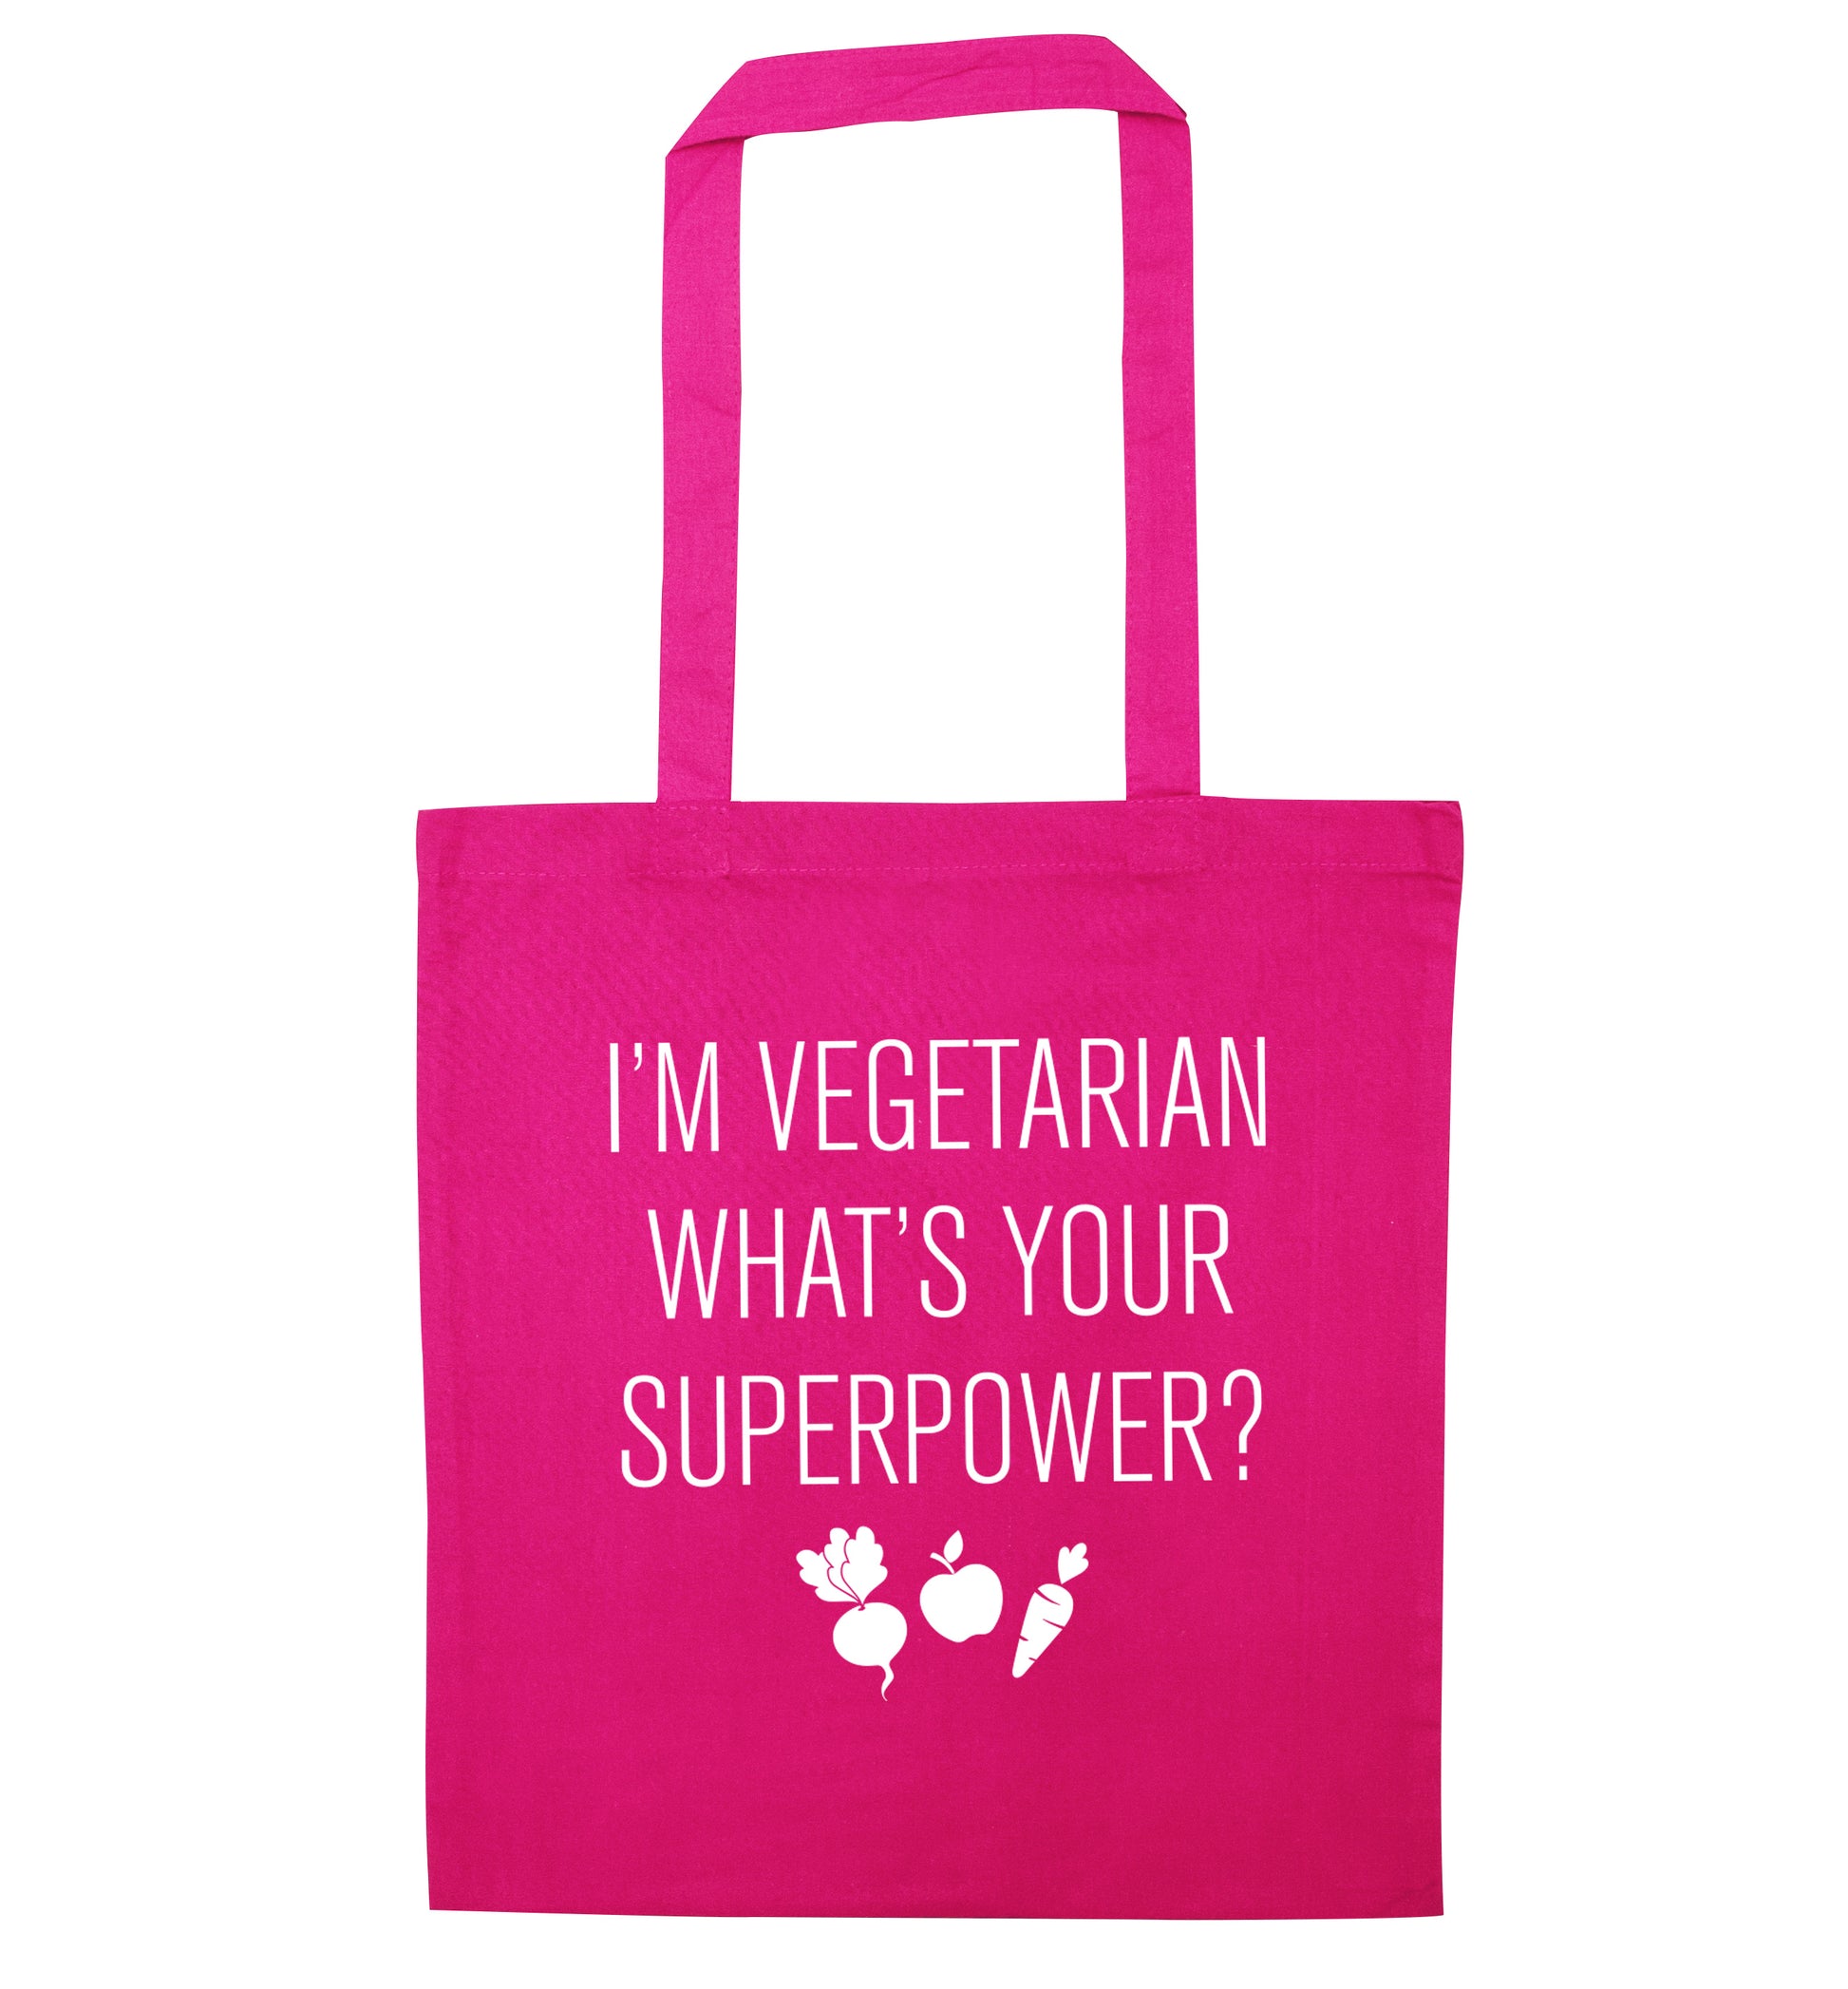 I'm vegetarian what's your superpower? pink tote bag